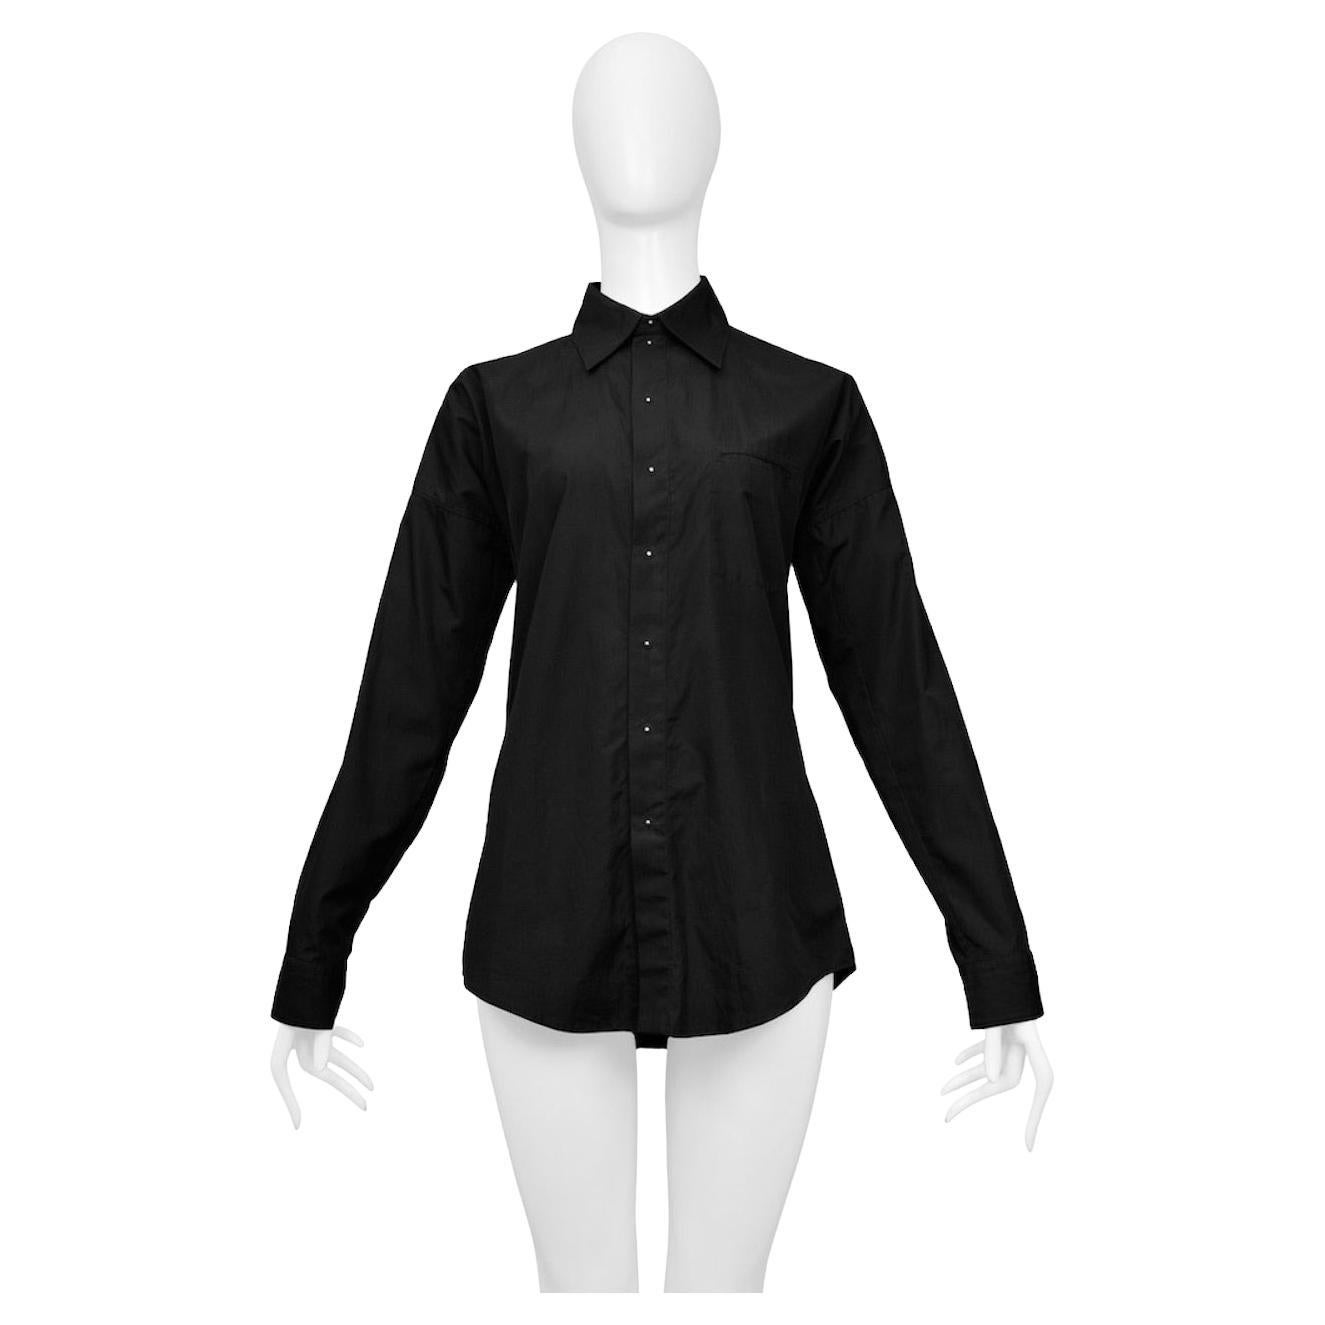 Jean Paul Gaultier Black Shirt With Silver Balls For Sale